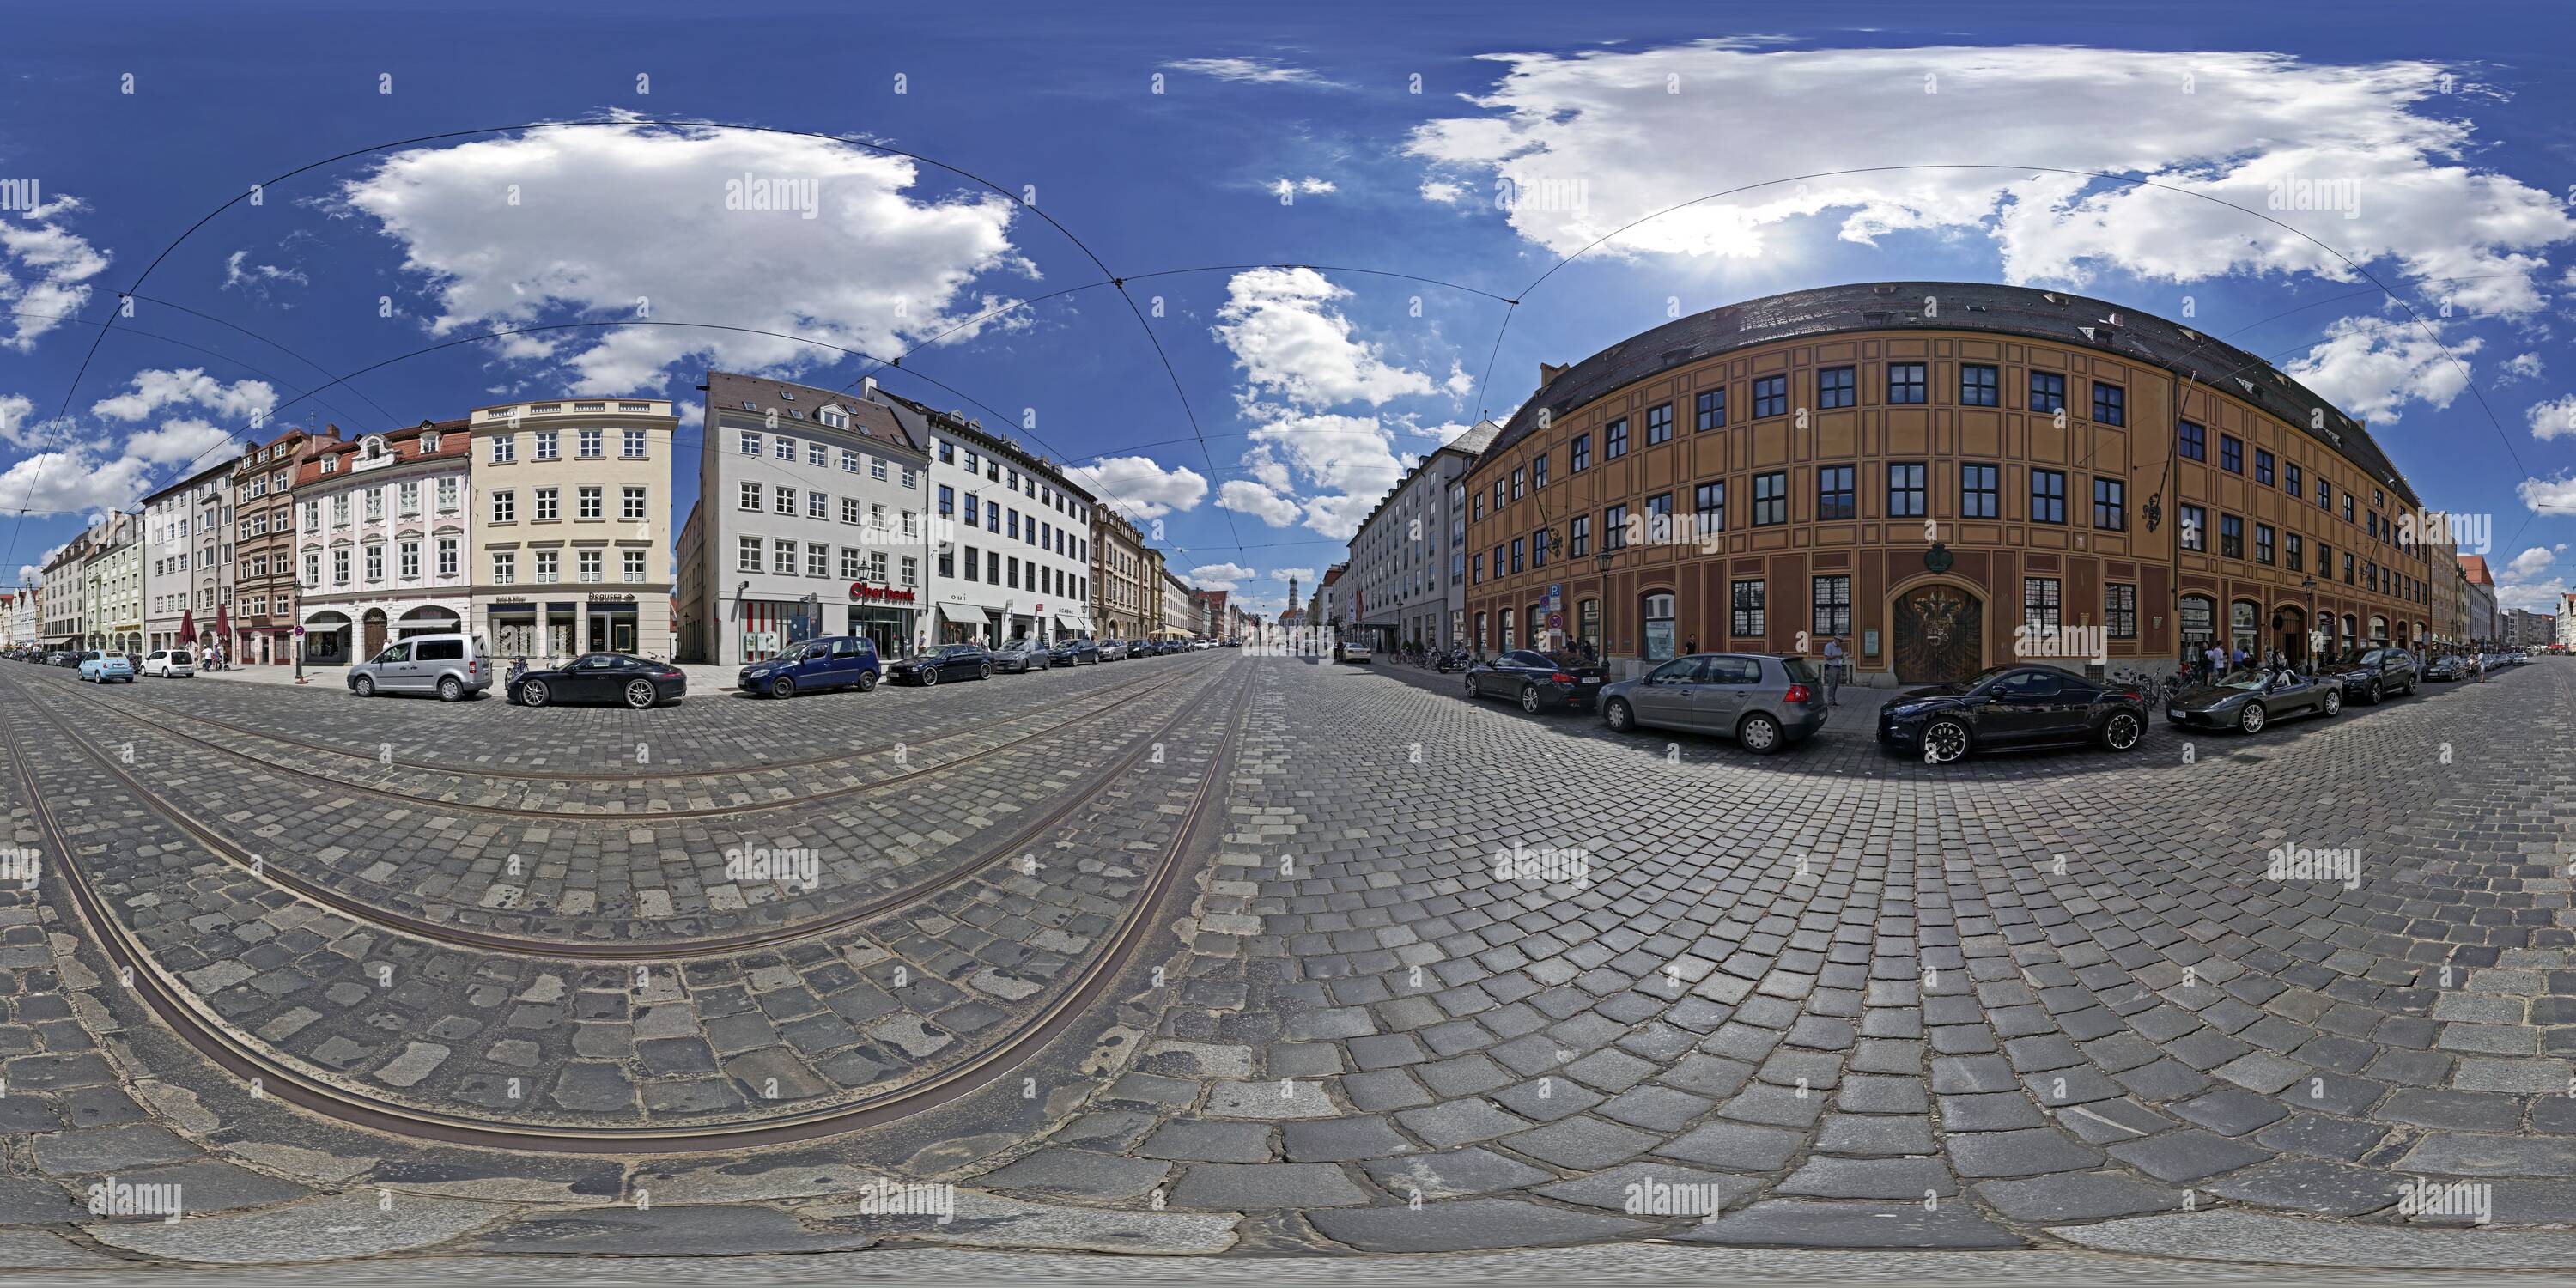 360 degree panoramic view of Augsburg, Palace of the Fugger